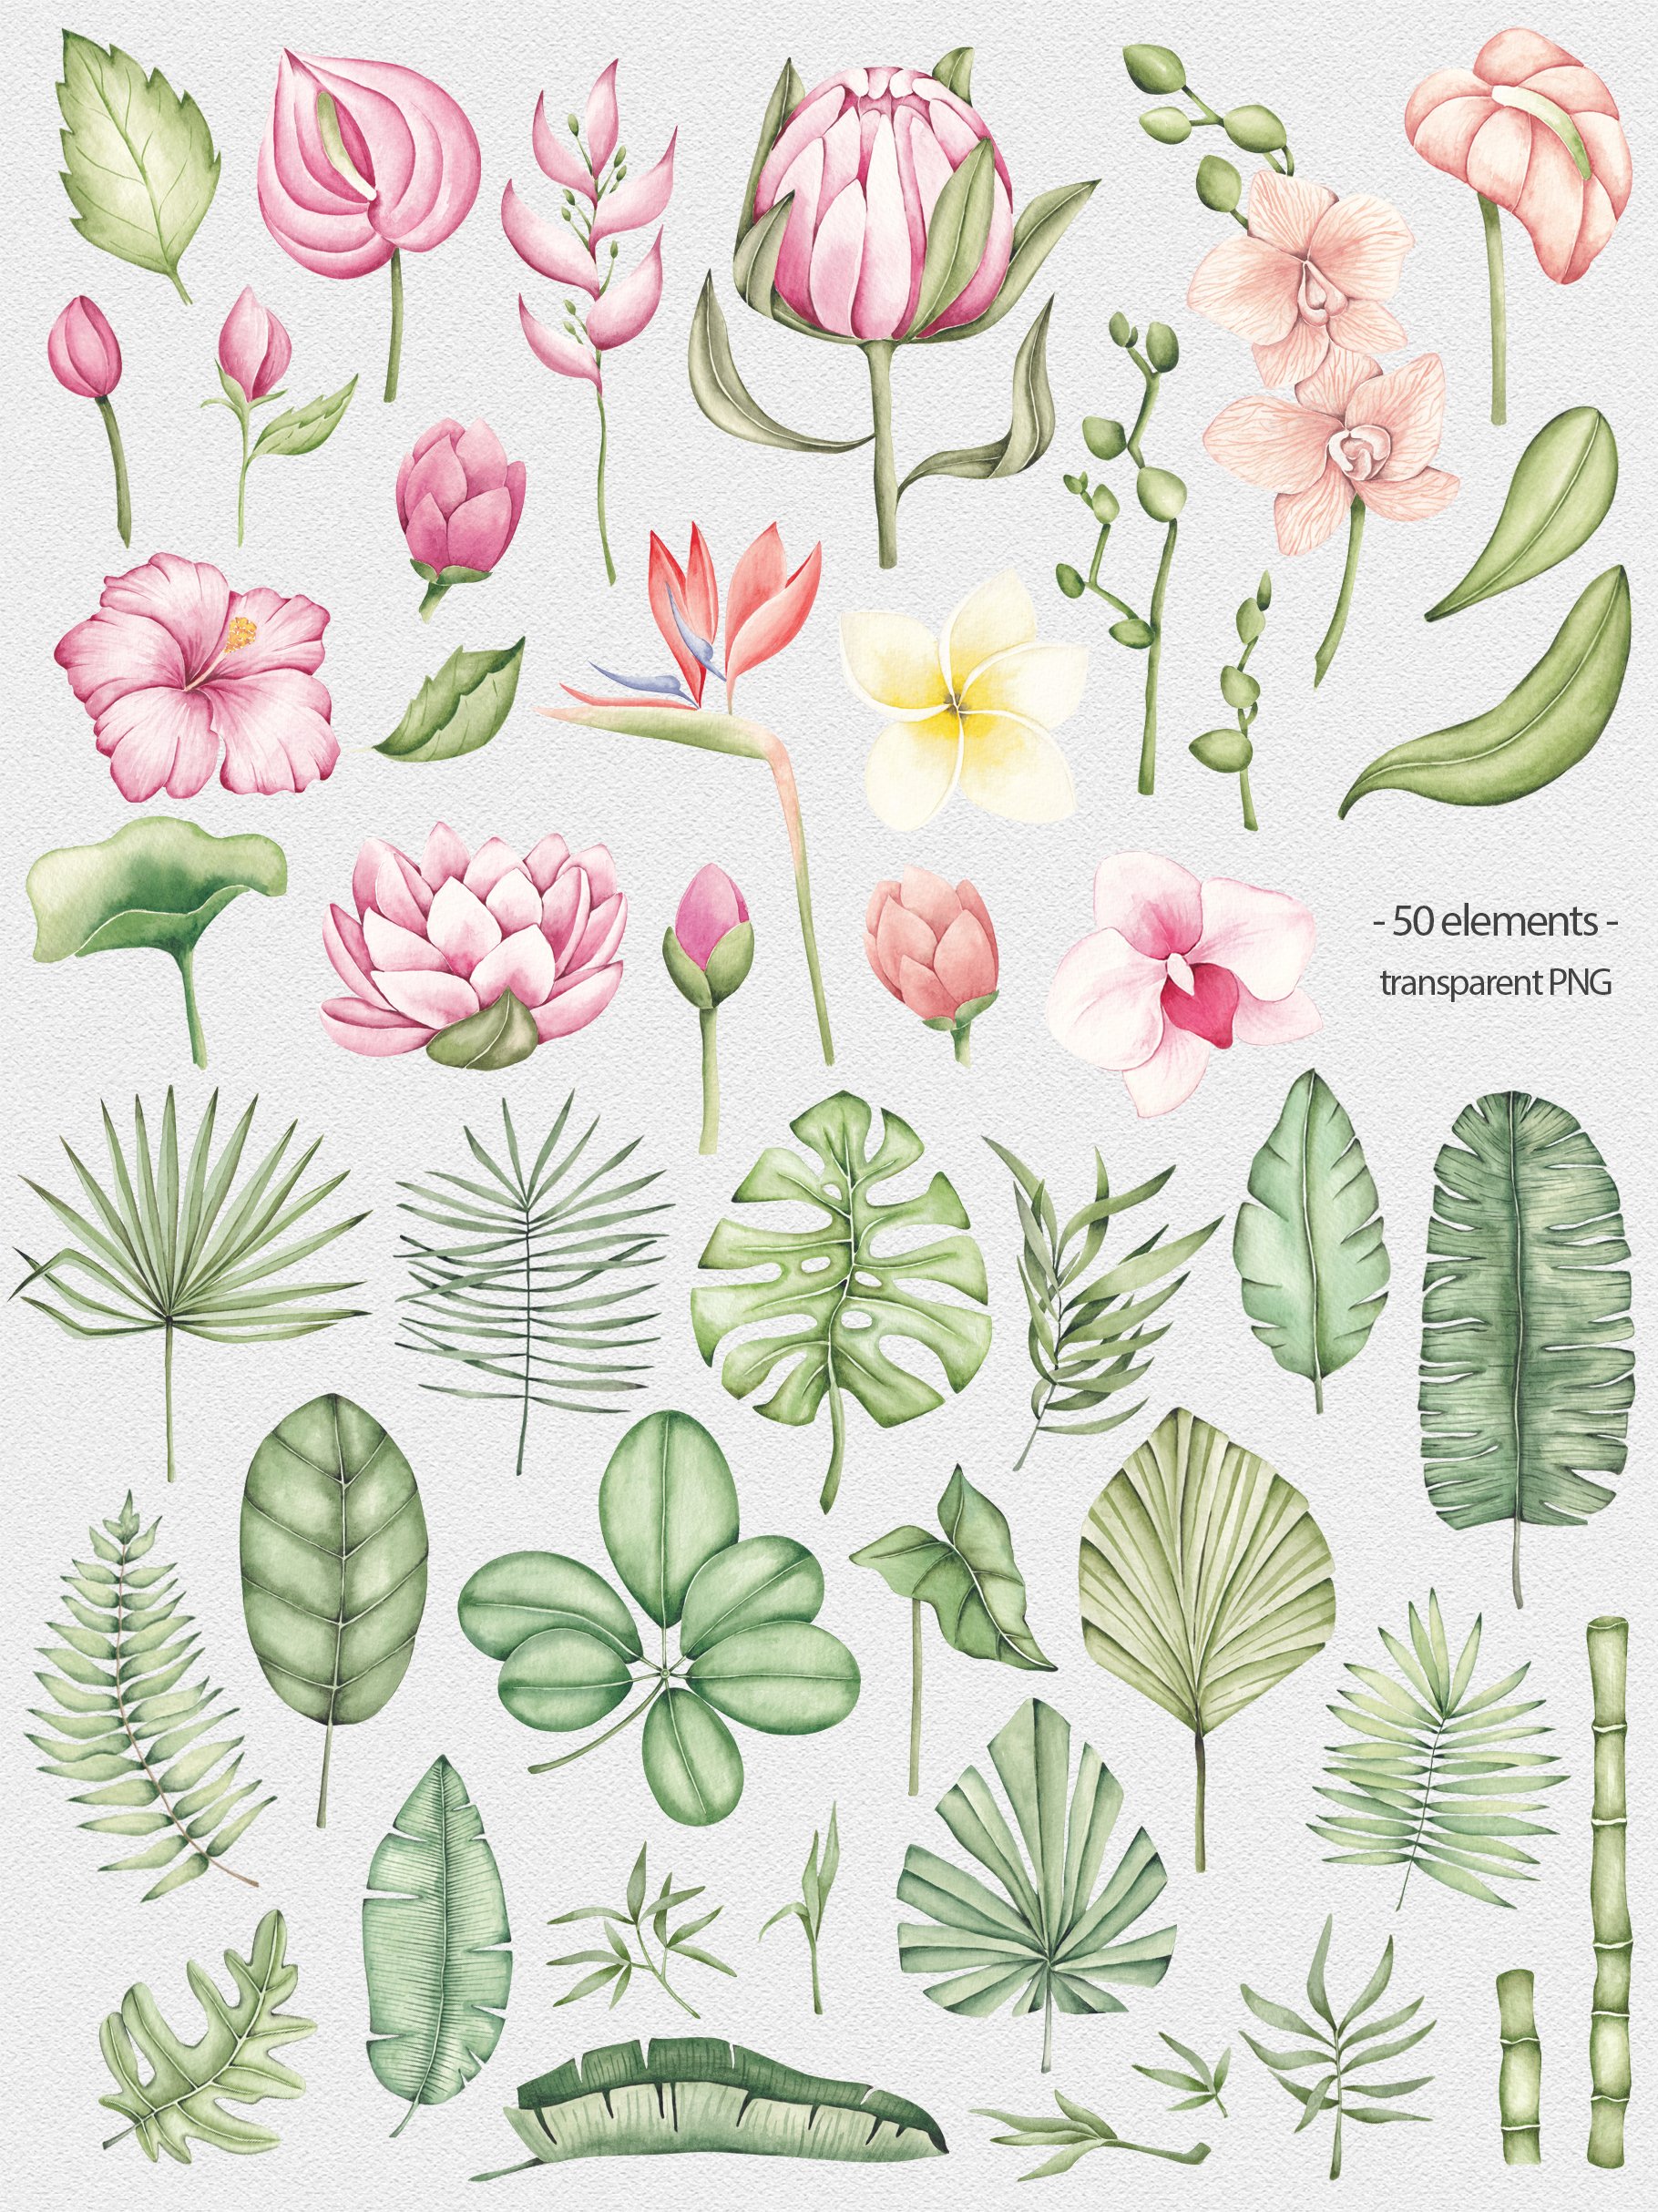 Diverse of leaves and flowers for illustrations.